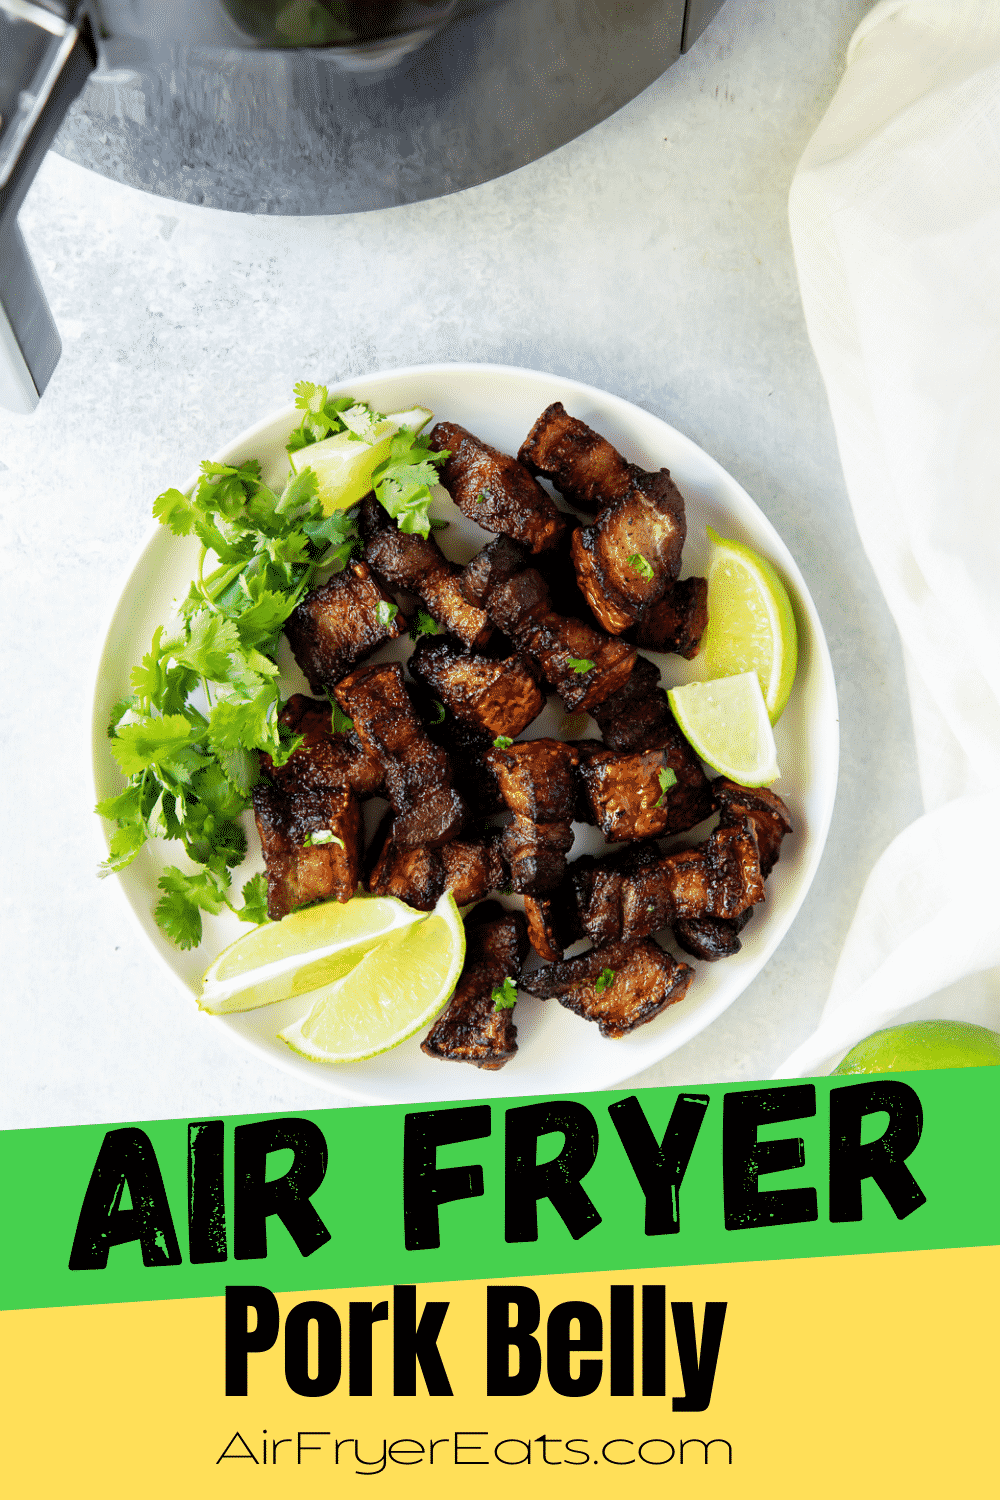 These little bites of Air Fryer Pork Belly are crispy, salty, and absolutely delicious. They will melt in your mouth with amazing flavor and texture. #pork #airfryer #porkbelly via @vegetarianmamma